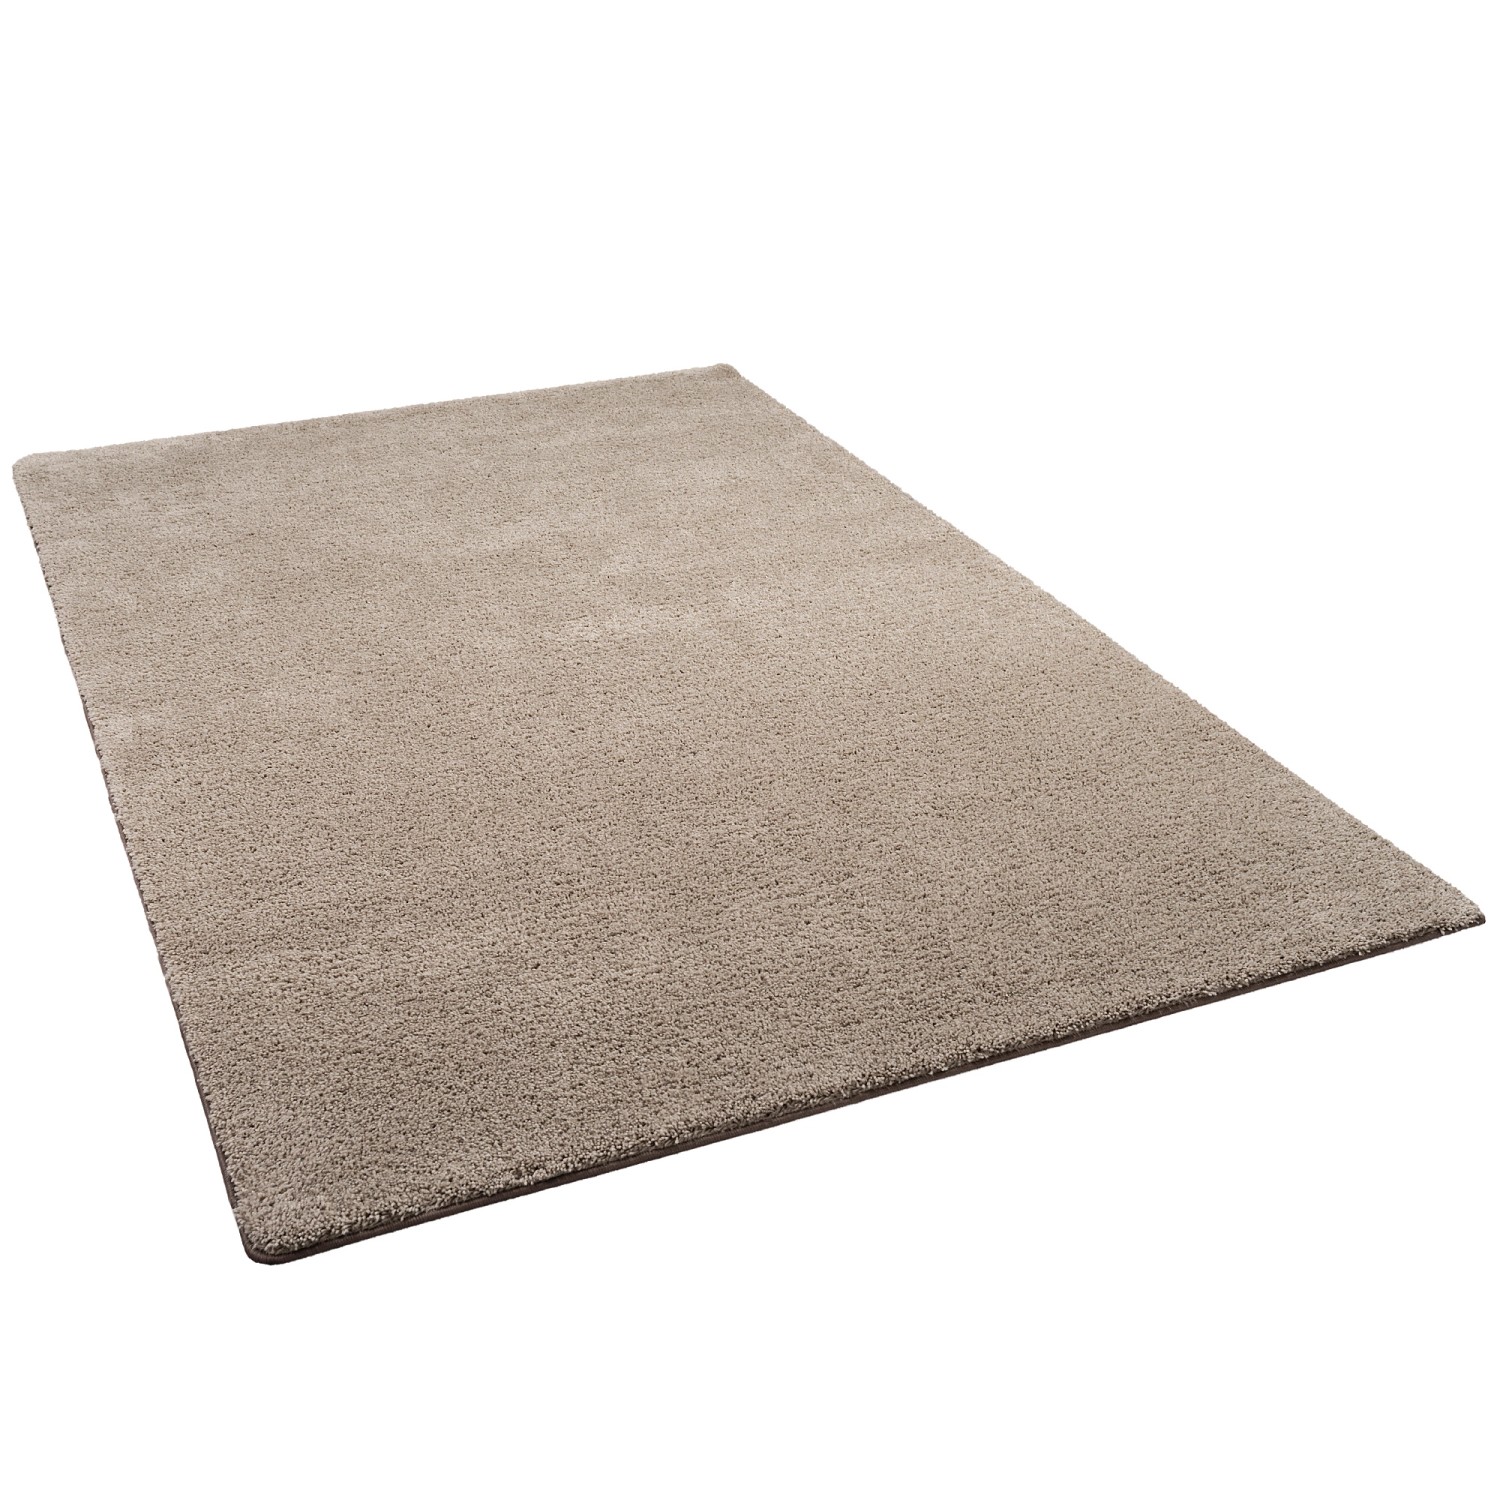 Snapstyle Hochflor Shaggy Teppich Palace Taupe 80x400cm